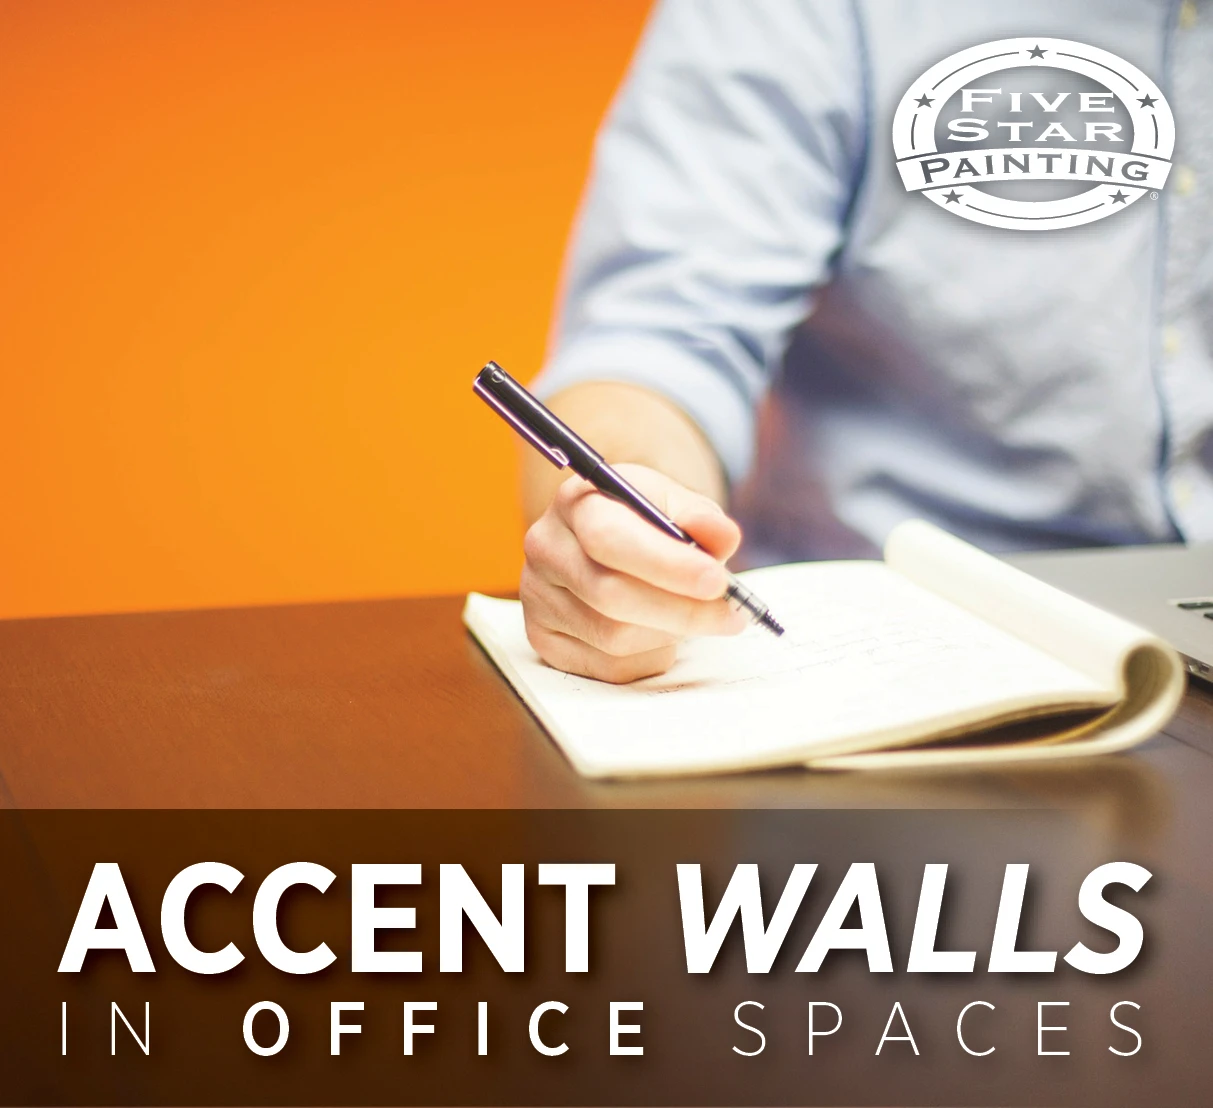 Blog title "Accent Walls in Office Spaces" and Five Star Painting logo superimposed over photo of person writing in a notebook at a desk